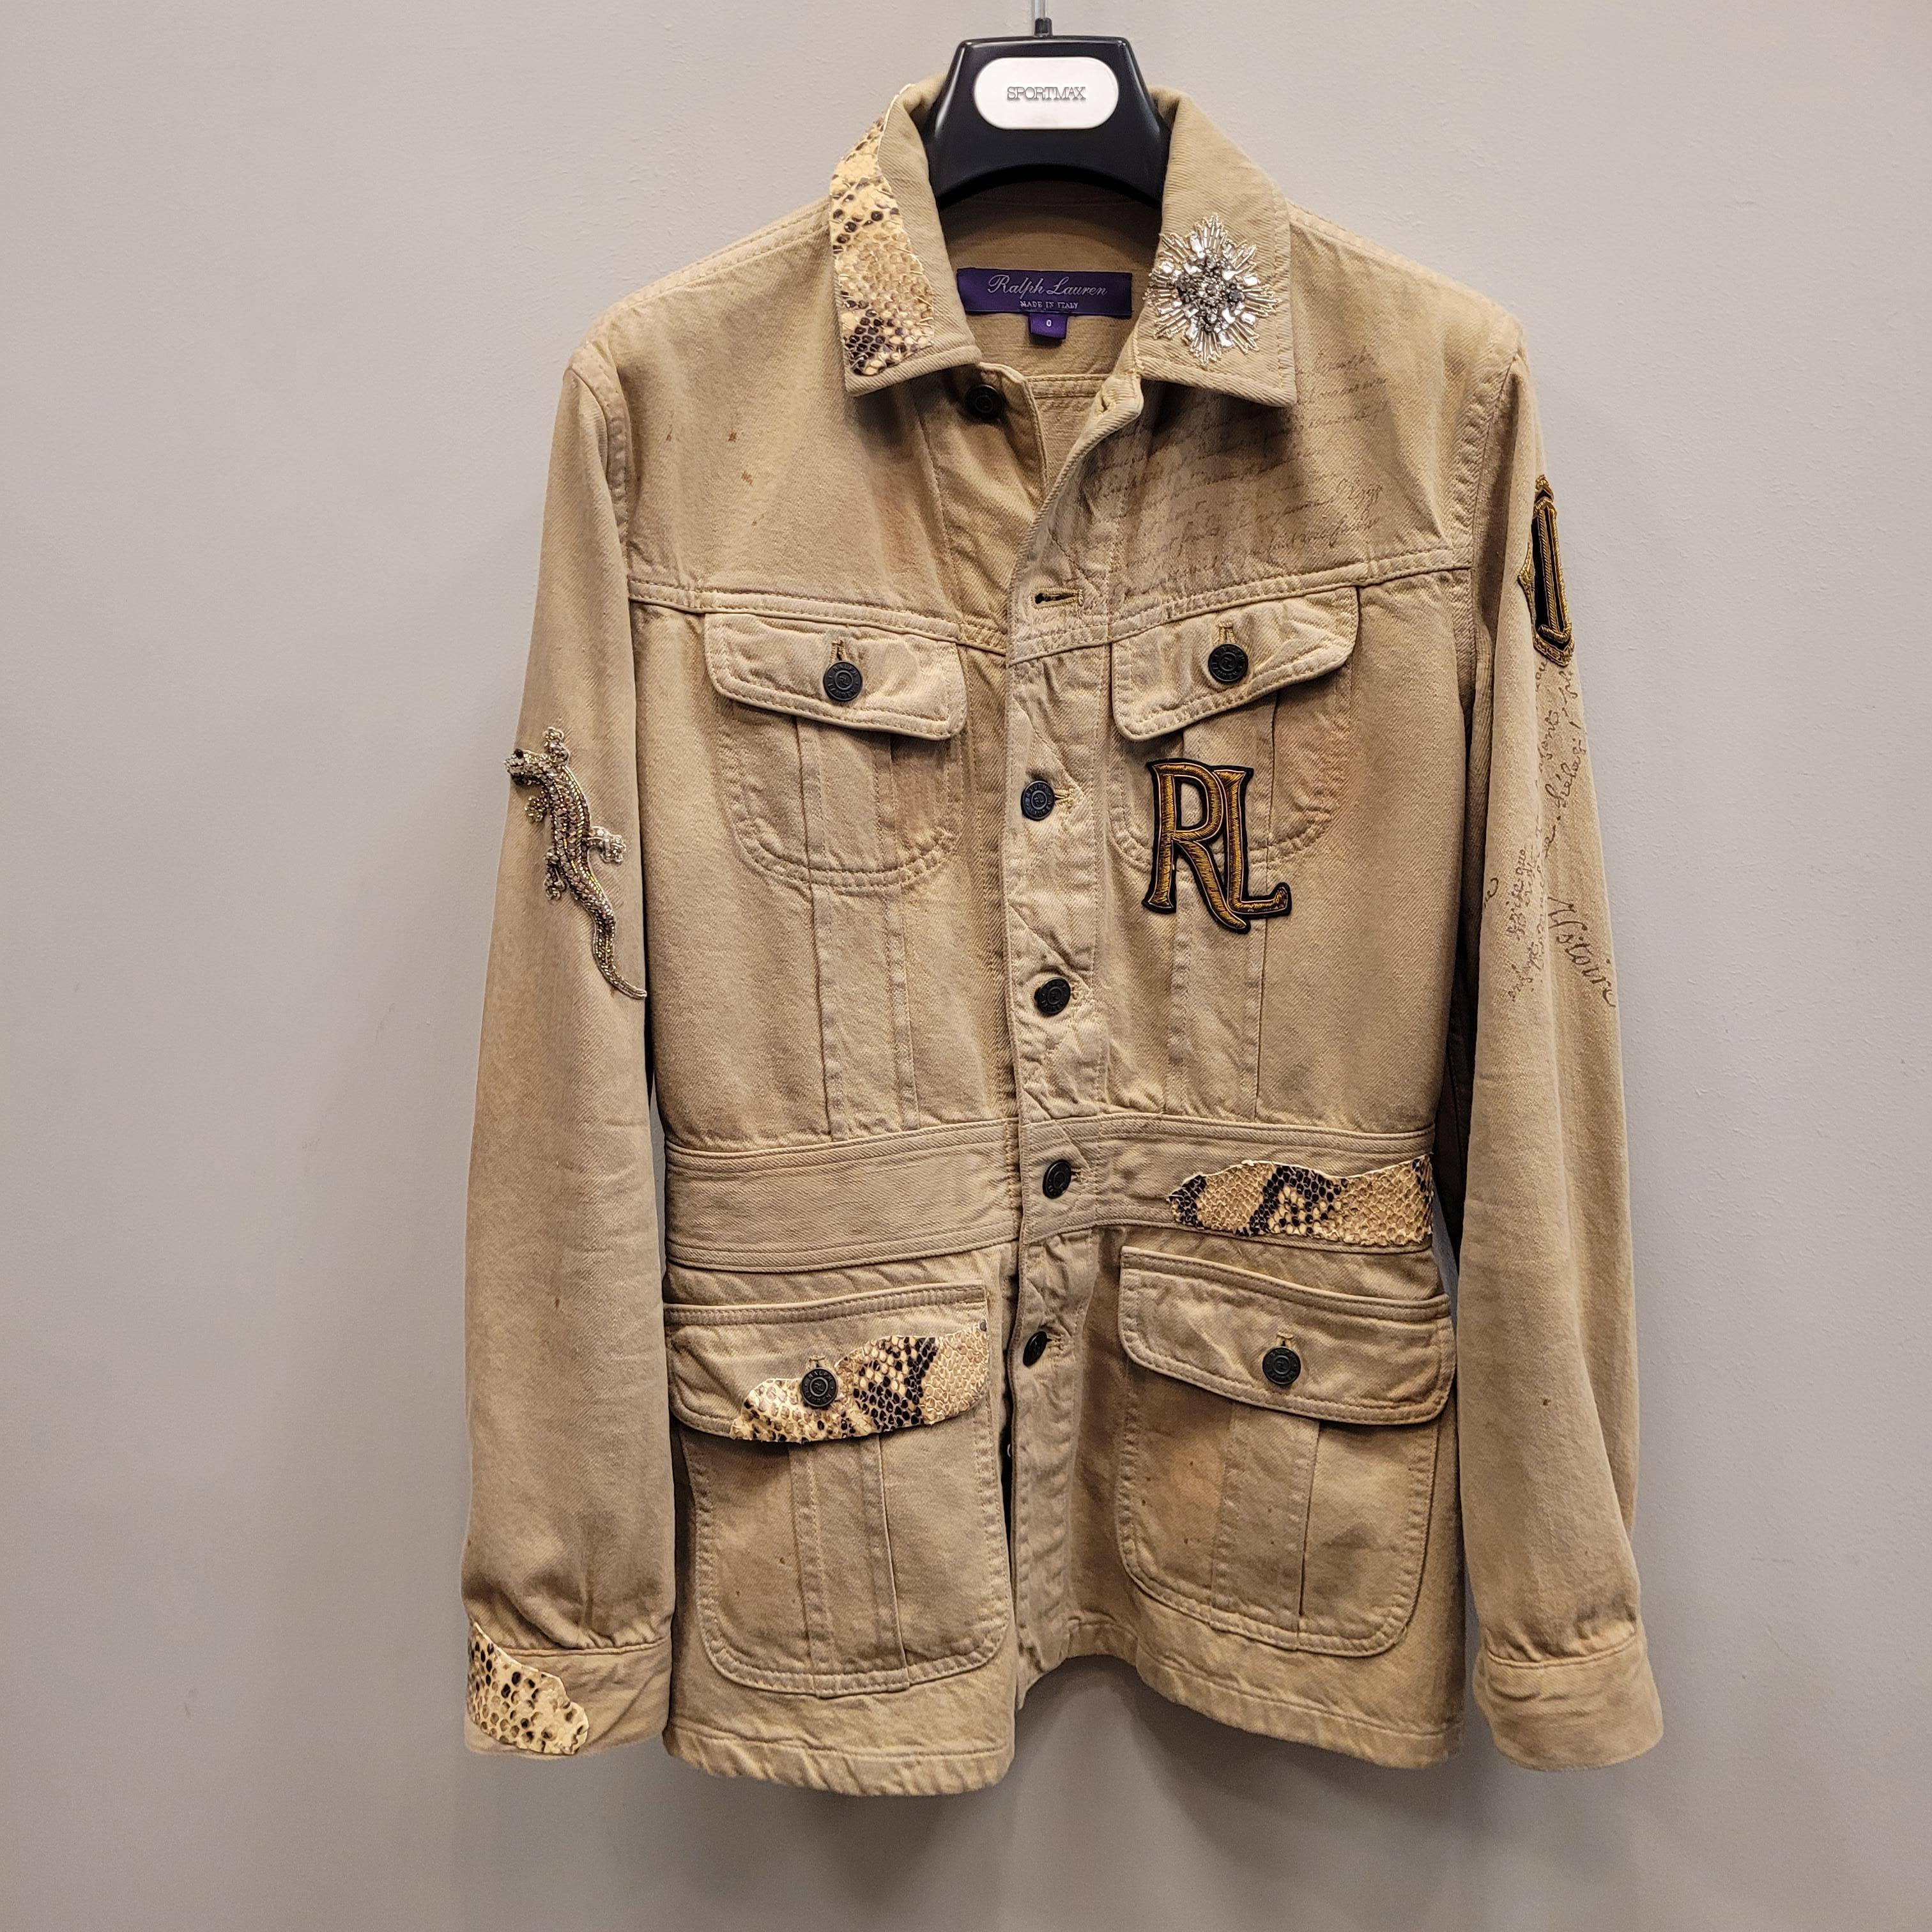 Outstanding and beautiful  safari jacket from the RALPH LAUREN collection, in a light khaki or sand color, with rhinestone inserts, pieces of imitation crocodile skin,
a beautiful salamander embroidered on one arm.
It is a unique, timeless piece, a